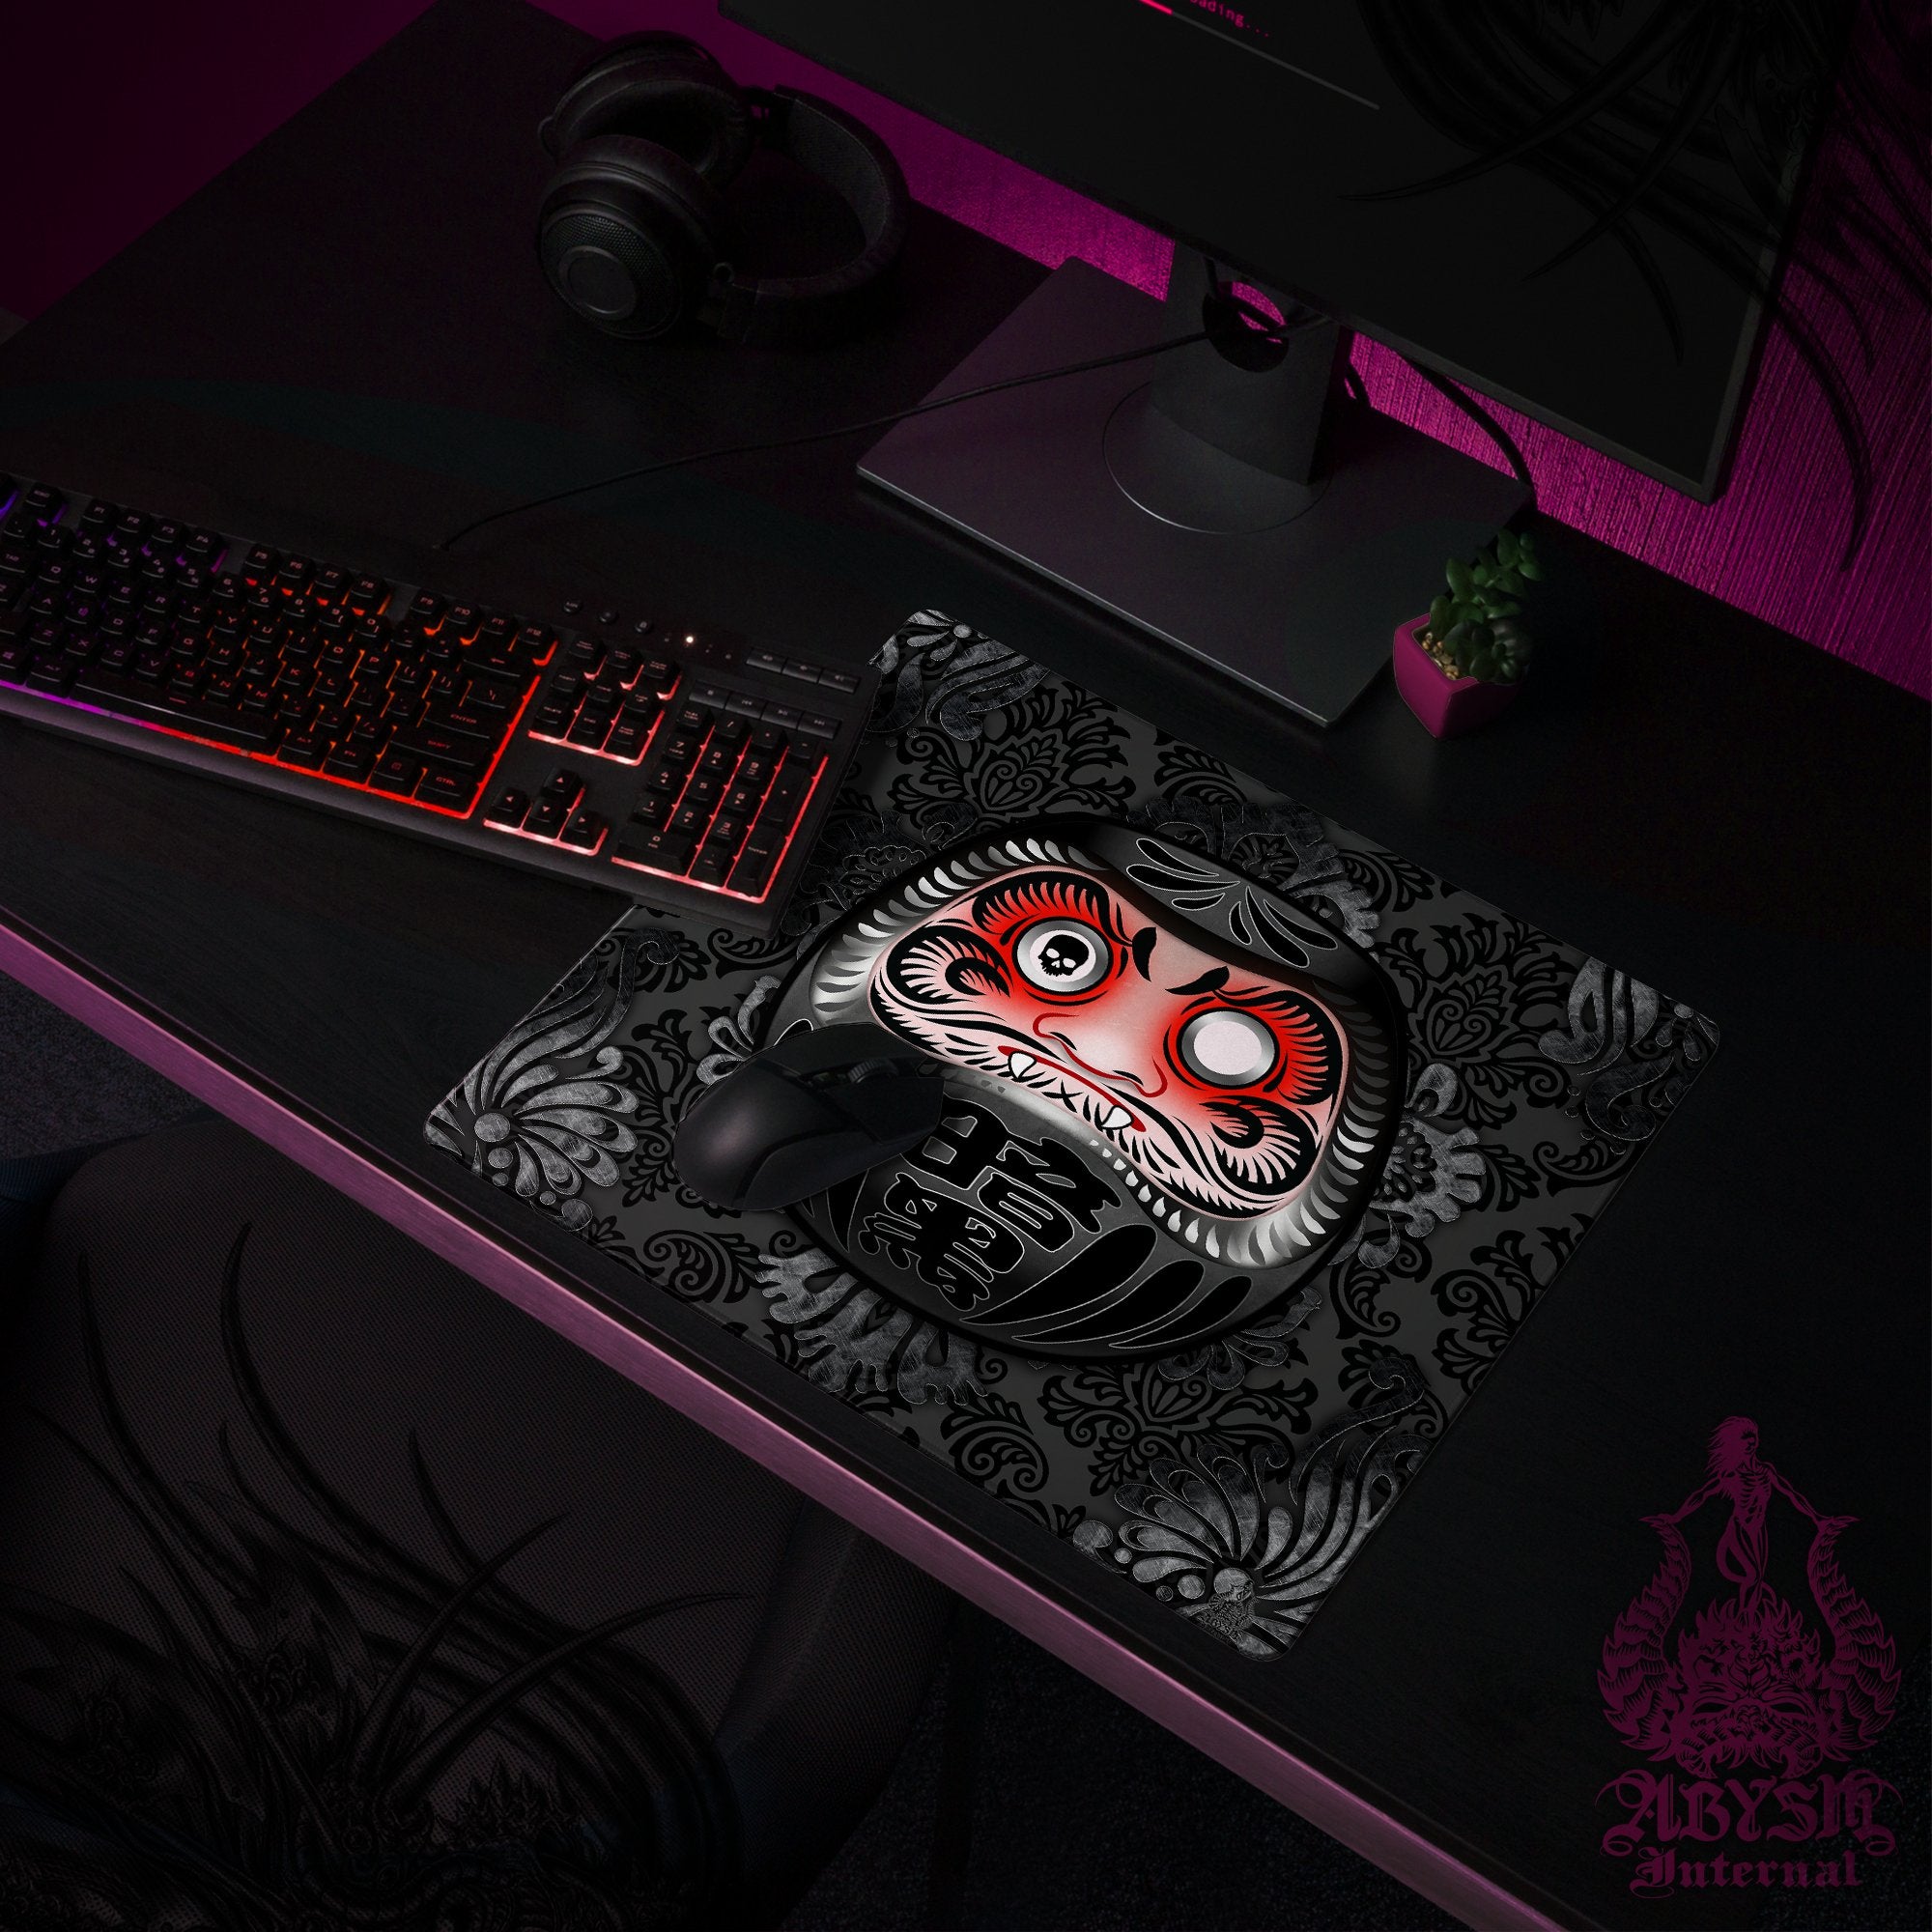 Gaming Desk Mat, Funny Daruma Mouse Pad, Gothic Table Protector Cover, Black Workpad, Dark Japanese Art Print - 2 Colors - Abysm Internal